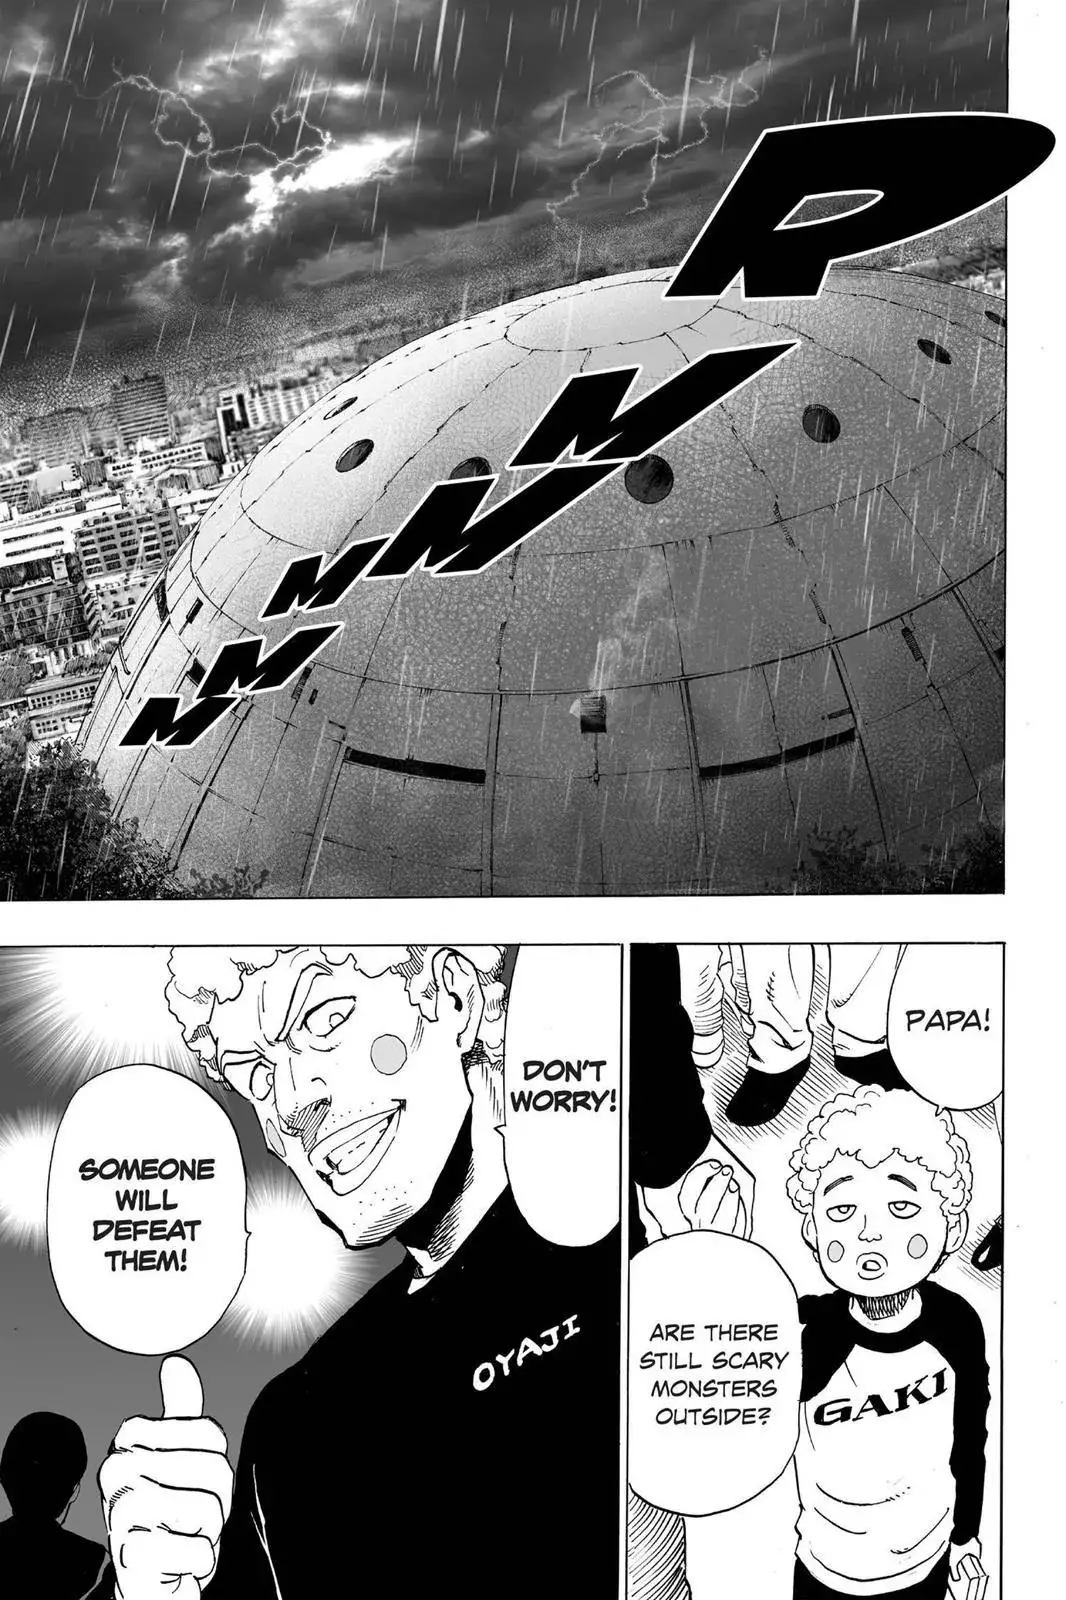 One Punch Man Chapter 25, READ One Punch Man Chapter 25 ONLINE, lost in the cloud genre,lost in the cloud gif,lost in the cloud girl,lost in the cloud goods,lost in the cloud goodreads,lost in the cloud,lost ark cloud gaming,lost odyssey cloud gaming,lost in the cloud fanart,lost in the cloud fanfic,lost in the cloud fandom,lost in the cloud first kiss,lost in the cloud font,lost in the cloud ending,lost in the cloud episode 97,lost in the cloud edit,lost in the cloud explained,lost in the cloud dog,lost in the cloud discord server,lost in the cloud desktop wallpaper,lost in the cloud drawing,can't find my cloud on network,lost in the cloud characters,lost in the cloud chapter 93 release date,lost in the cloud birthday,lost in the cloud birthday art,lost in the cloud background,lost in the cloud banner,lost in the clouds meaning,what is the black cloud in lost,lost in the cloud ao3,lost in the cloud anime,lost in the cloud art,lost in the cloud author twitter,lost in the cloud author instagram,lost in the cloud artist,lost in the cloud acrylic stand,lost in the cloud artist twitter,lost in the cloud art style,lost in the cloud analysis